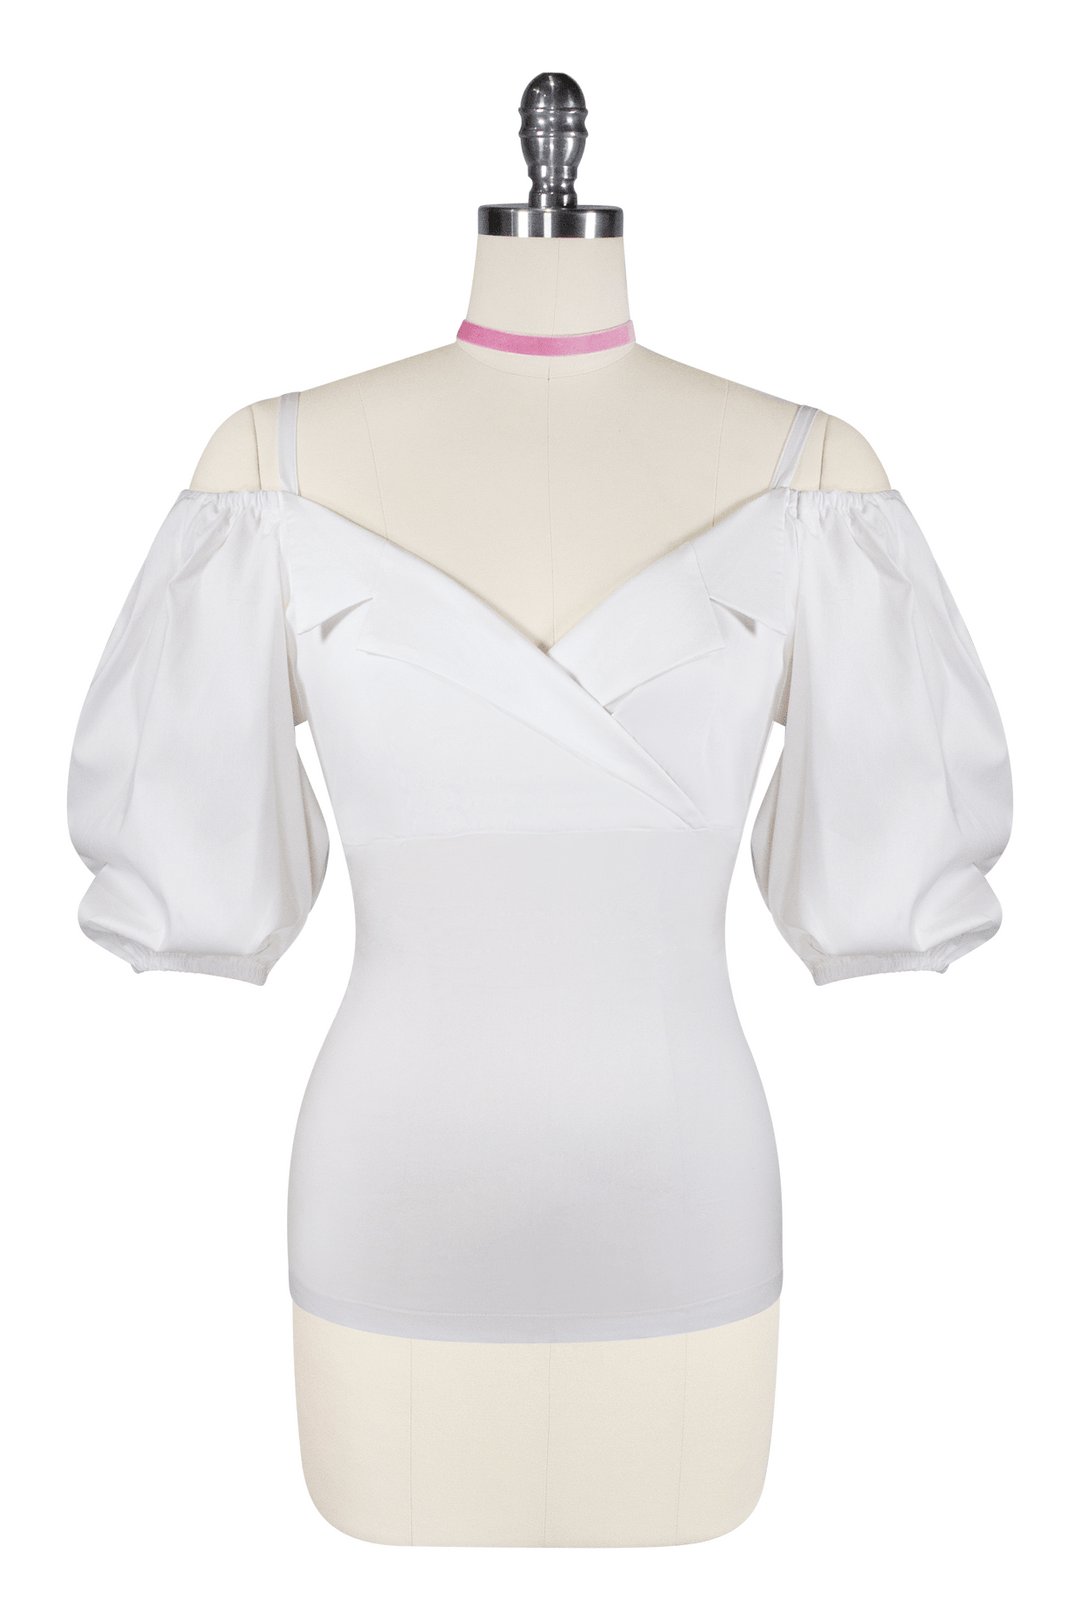 French Vacation Classic Top (Off White) - Kitten D'Amour